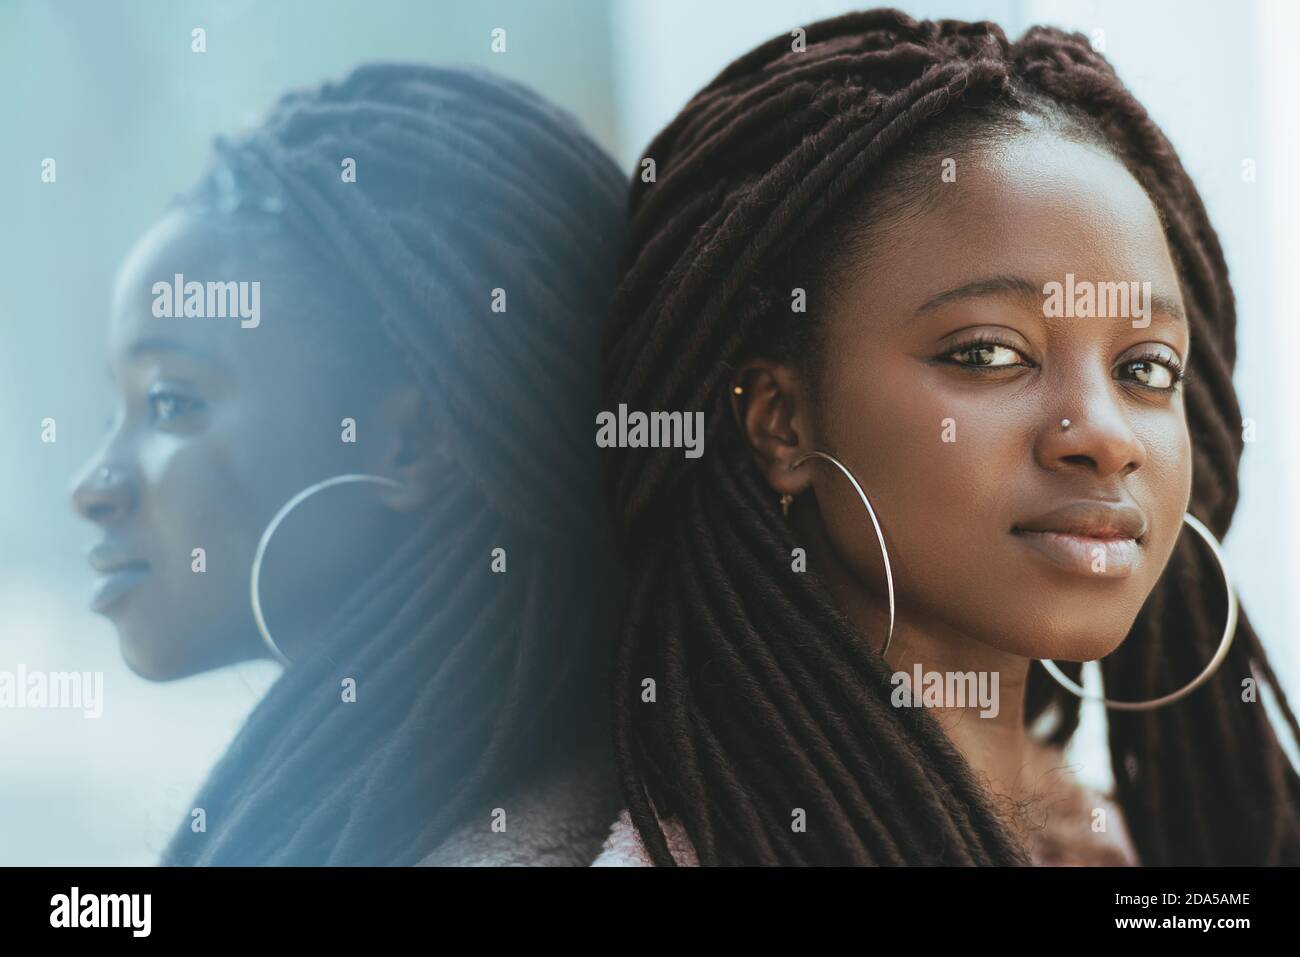 A close-up portrait of a cute young black woman with dreadlocks and huge earrings, piercing in her nose, she is leaning against a glass wall outdoors Stock Photo